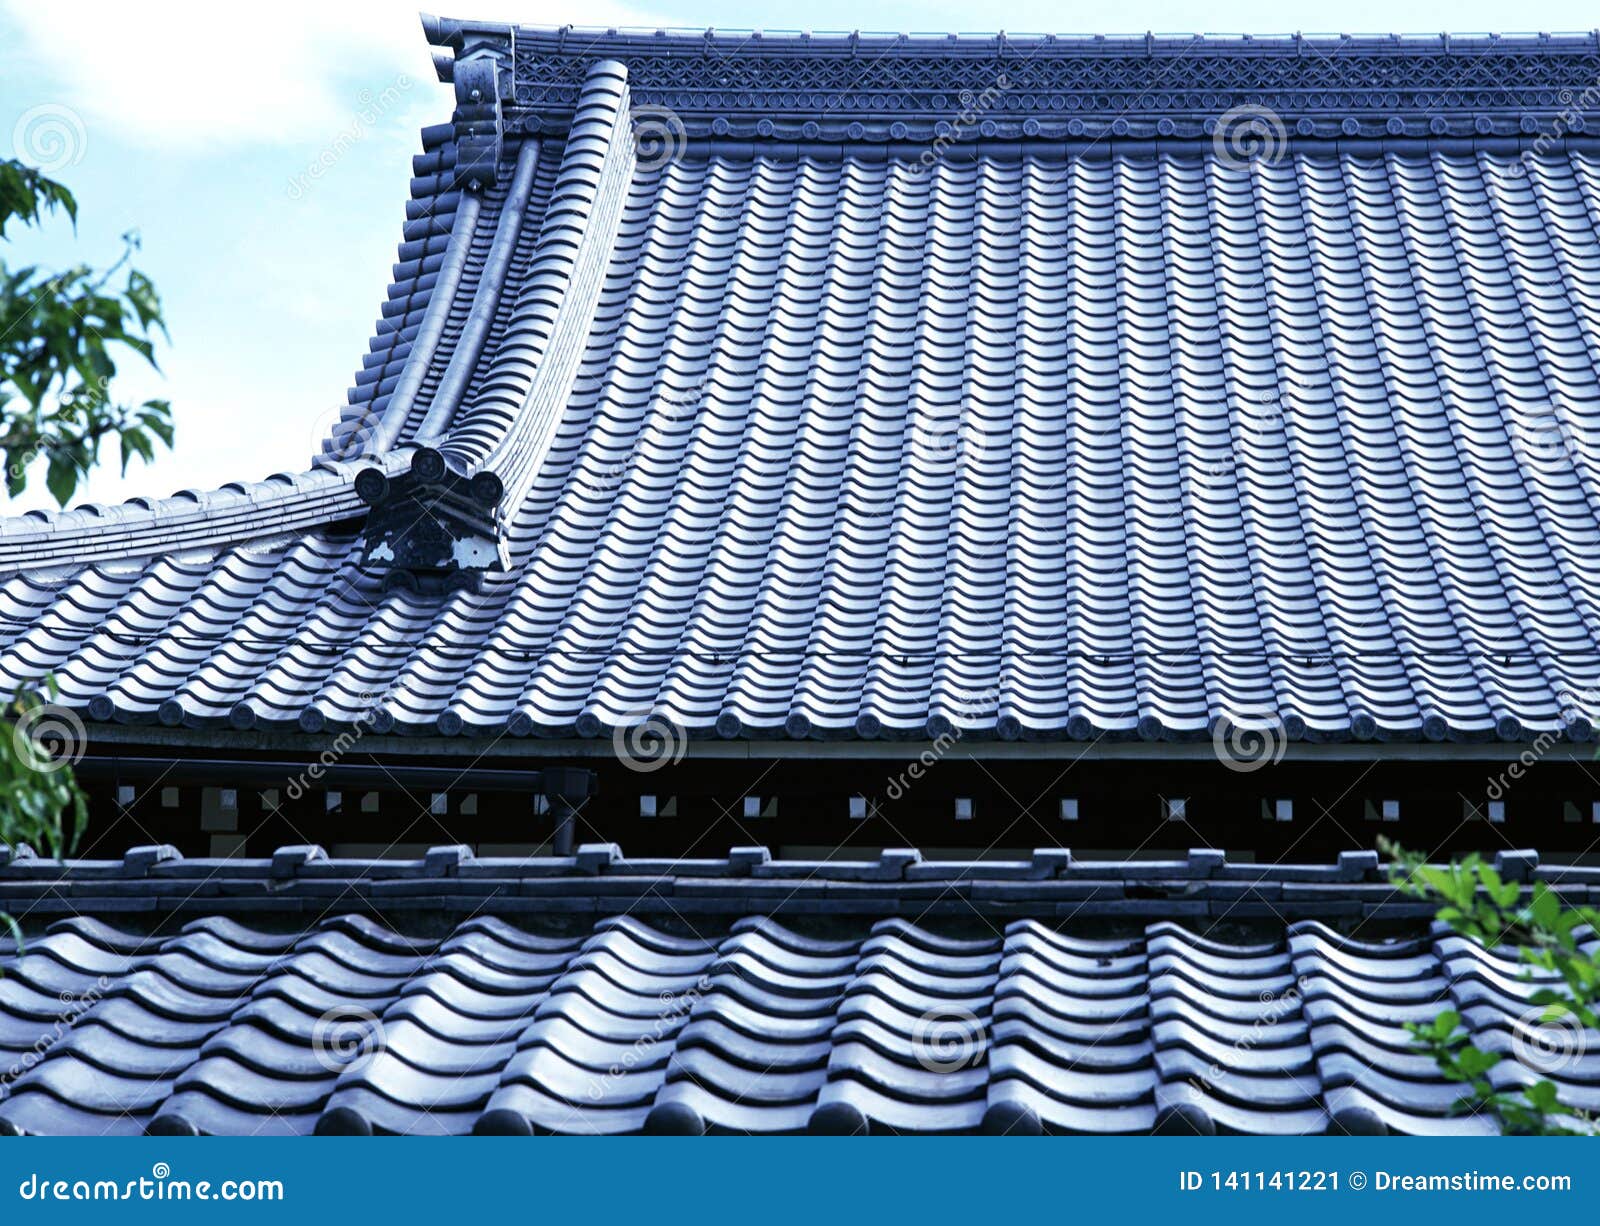 Traditional Japanese Temple Roof Tiles - HooDoo Wallpaper